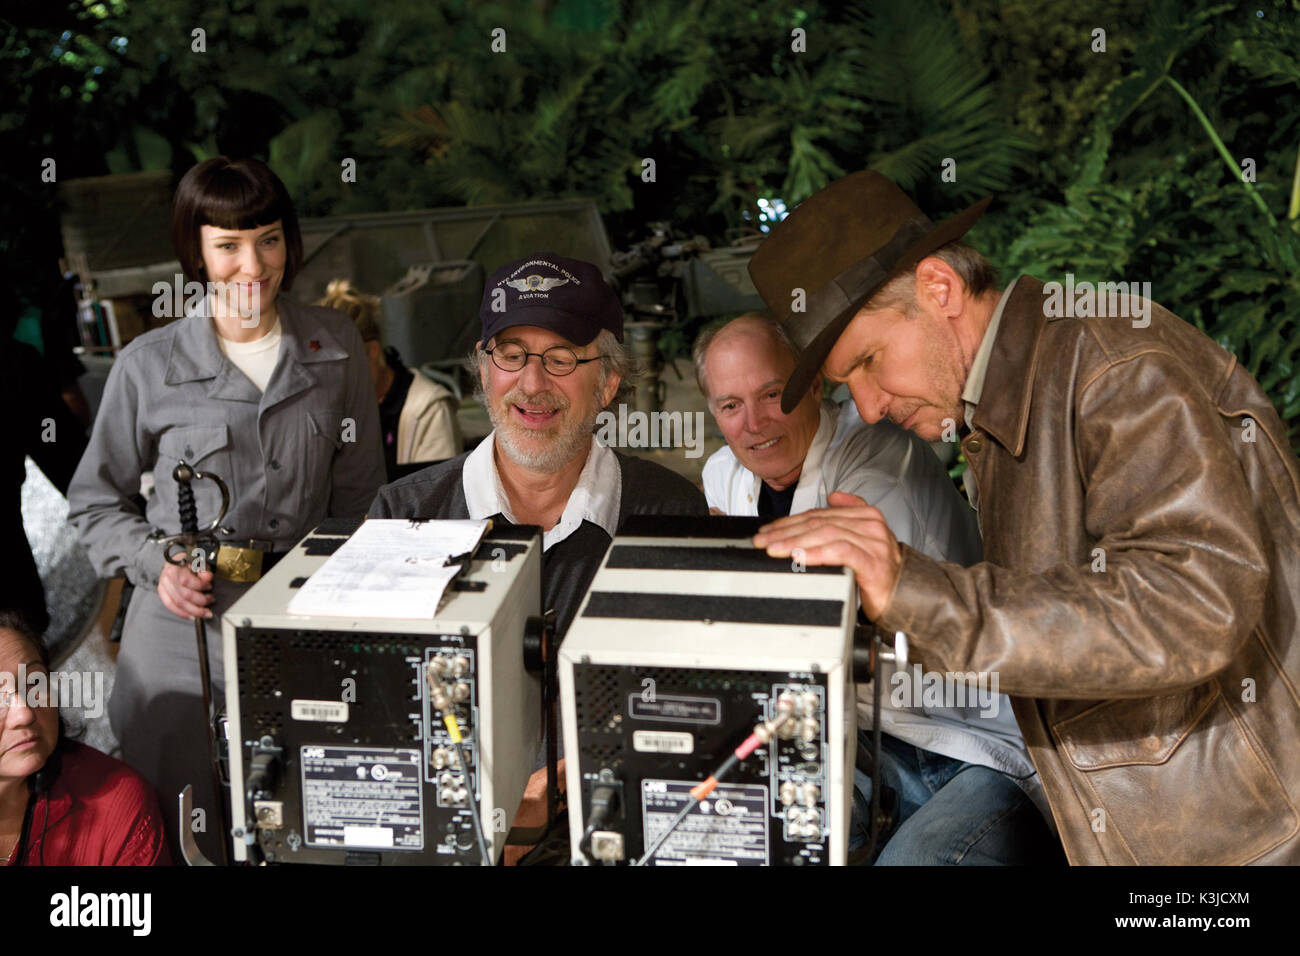 INDIANA JONES AND THE KINGDOM OF THE CRYSTAL SKULL CATE BLANCHETT, Director STEVEN SPIELBERG, Producer FRANK MARSHALL, HARRISON FORD INDIANA JONES AND THE KINGDOM OF THE CRYSTAL SKULL     Date: 2008 Stock Photo